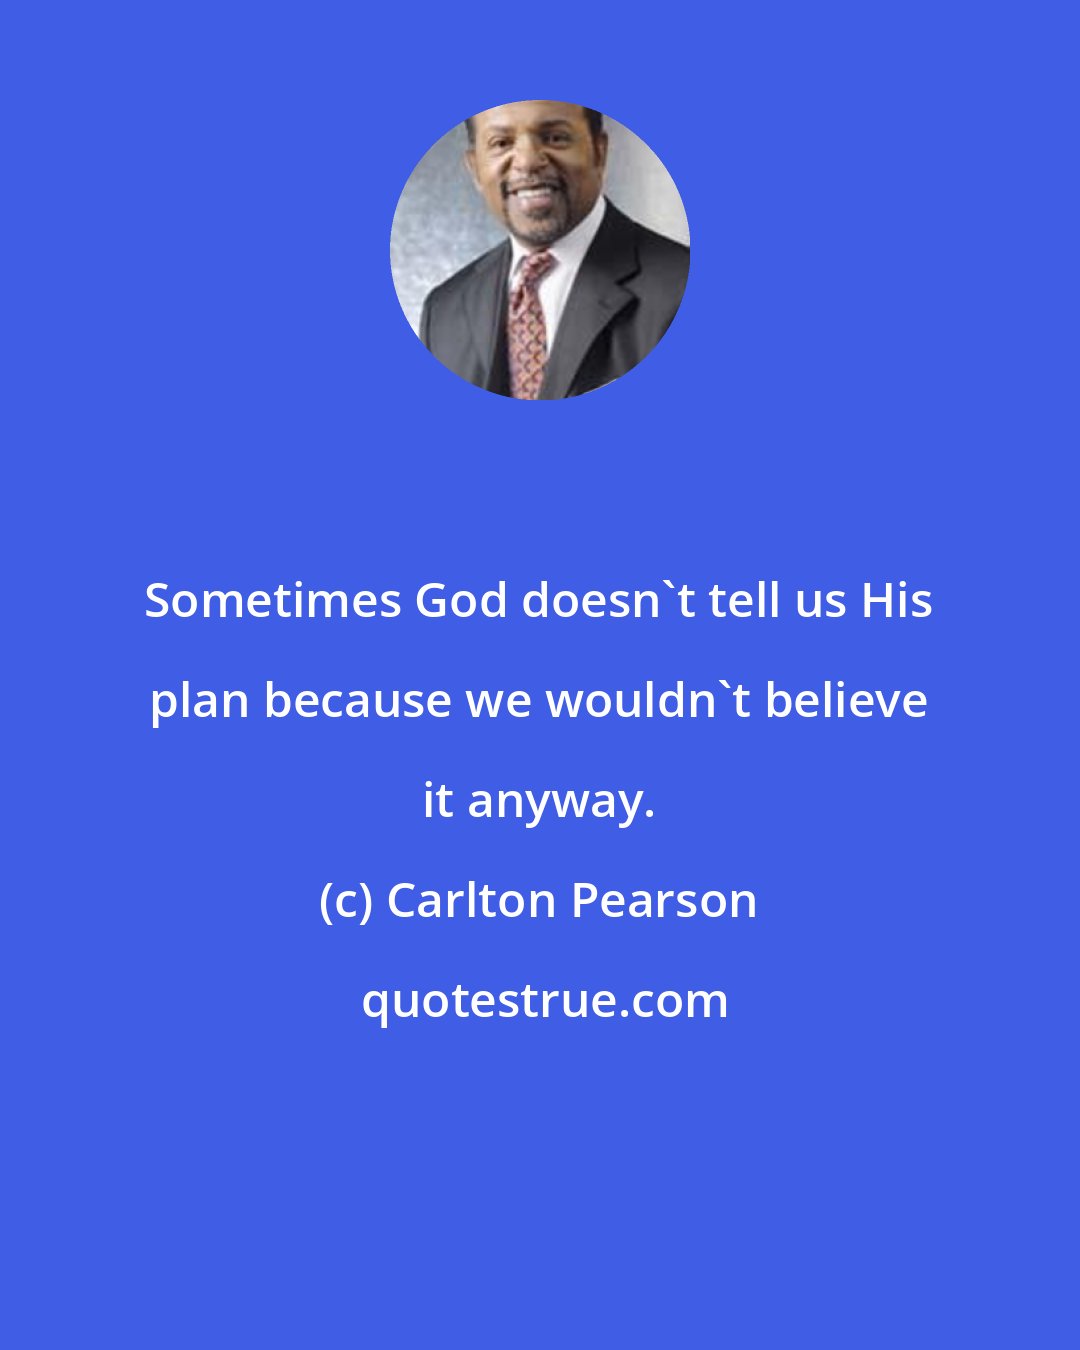 Carlton Pearson: Sometimes God doesn't tell us His plan because we wouldn't believe it anyway.